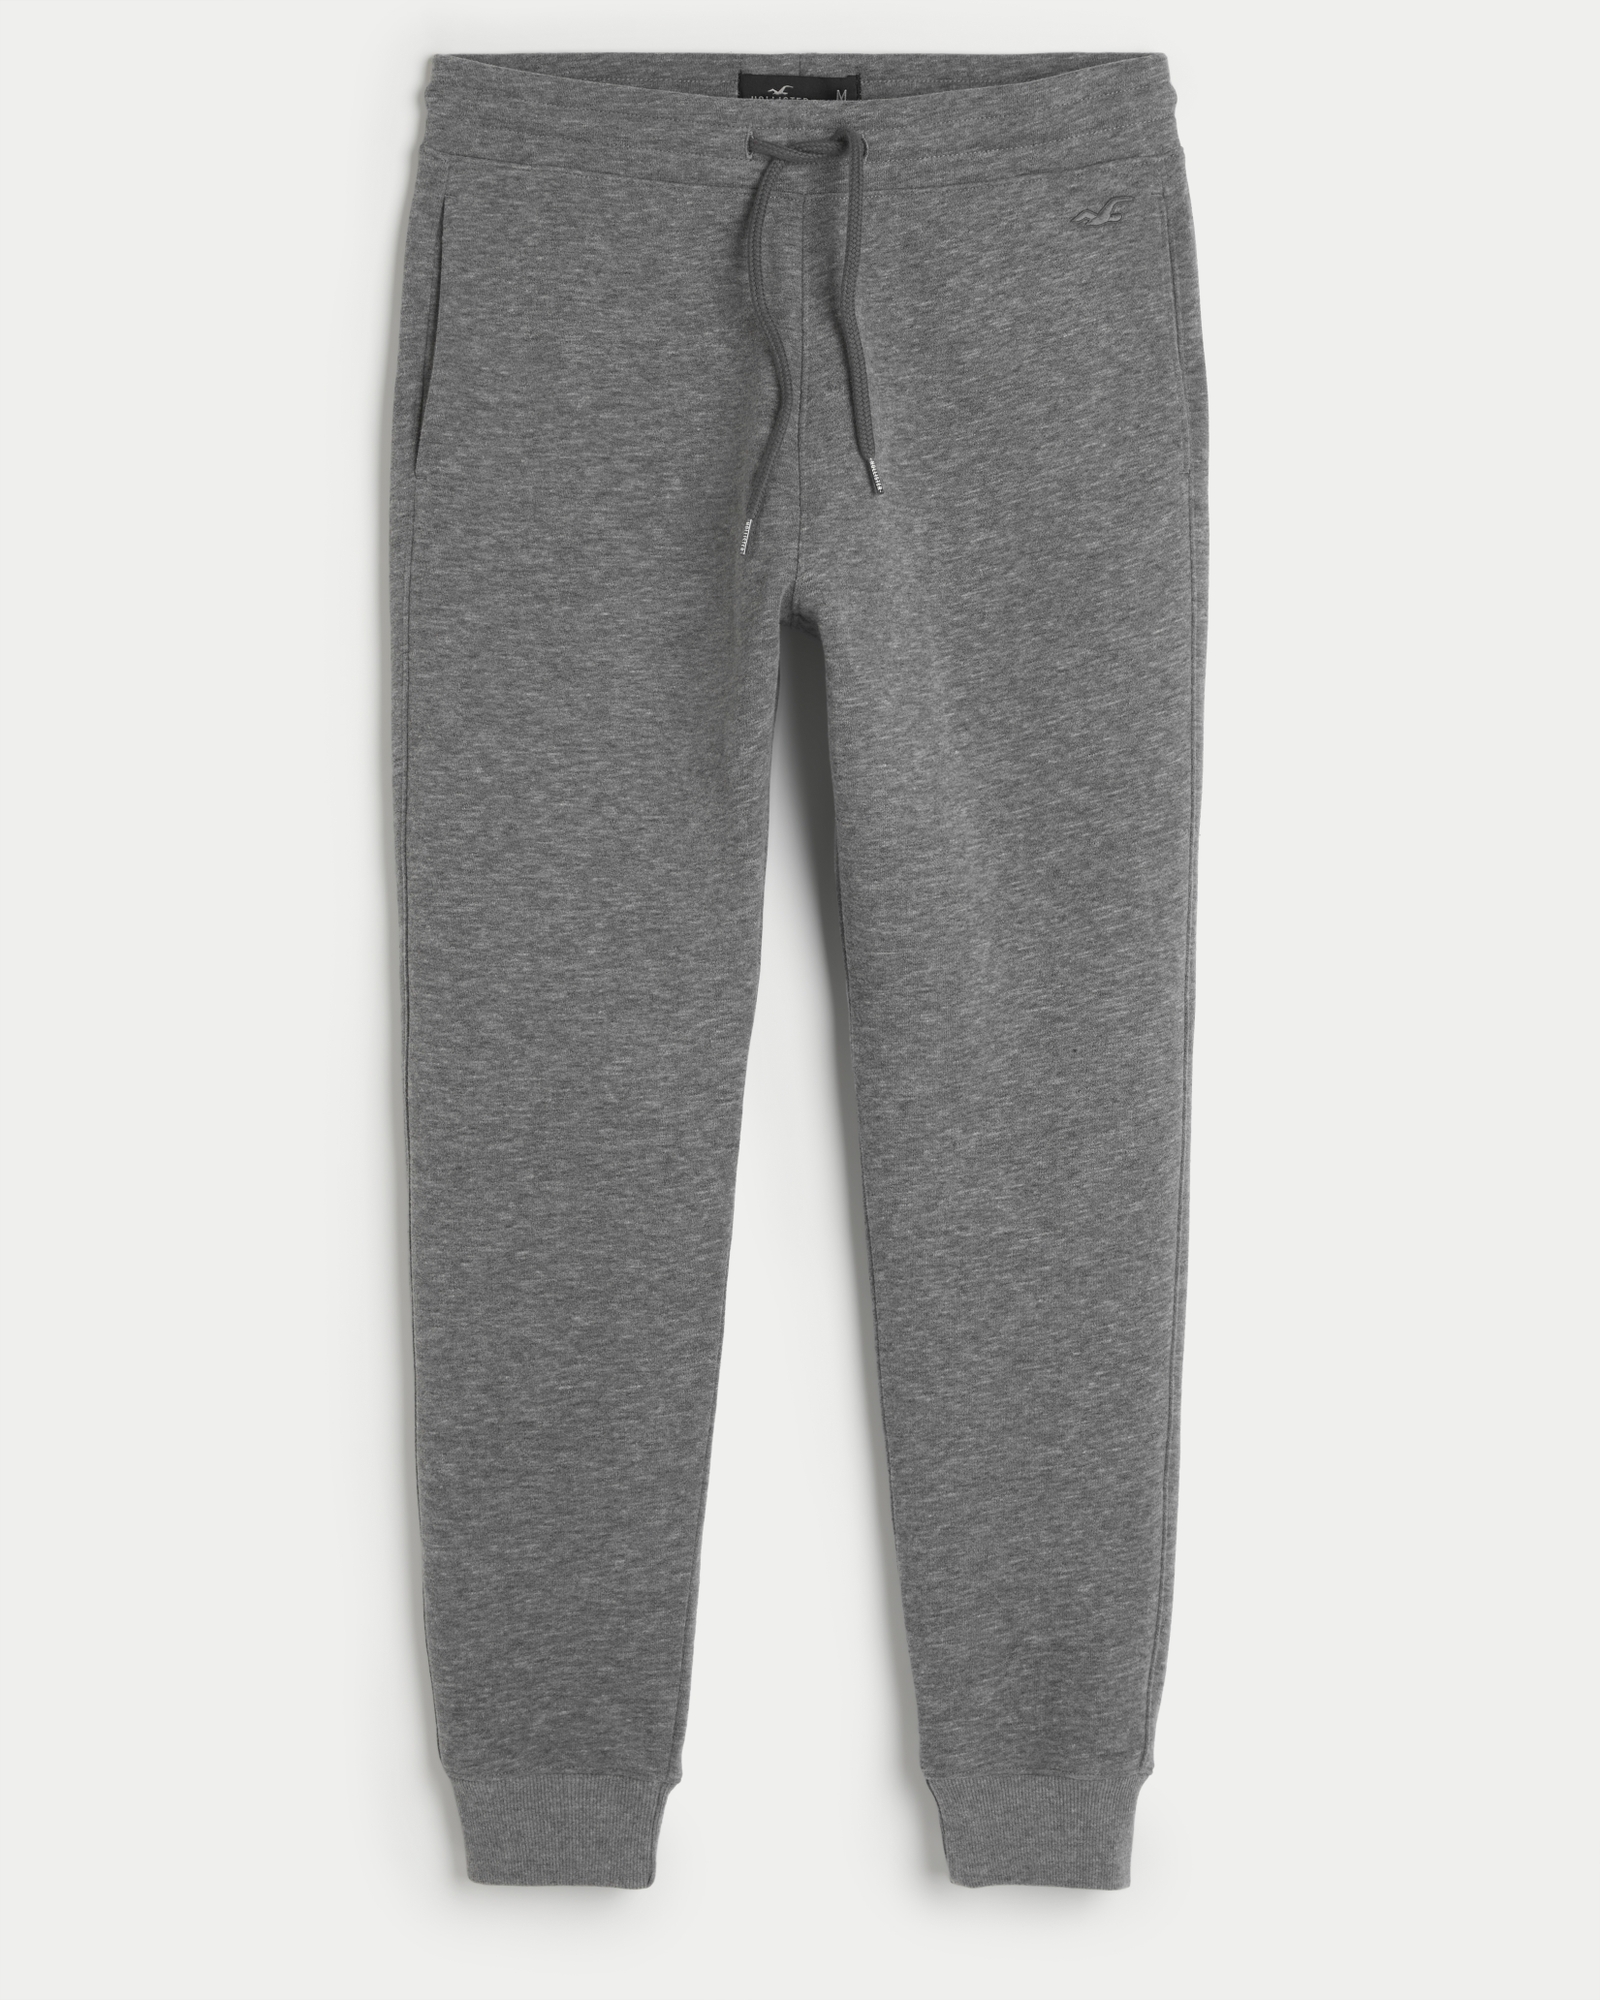 hollister joggers men's size M activewear gym gray embroidered logo low  Rise